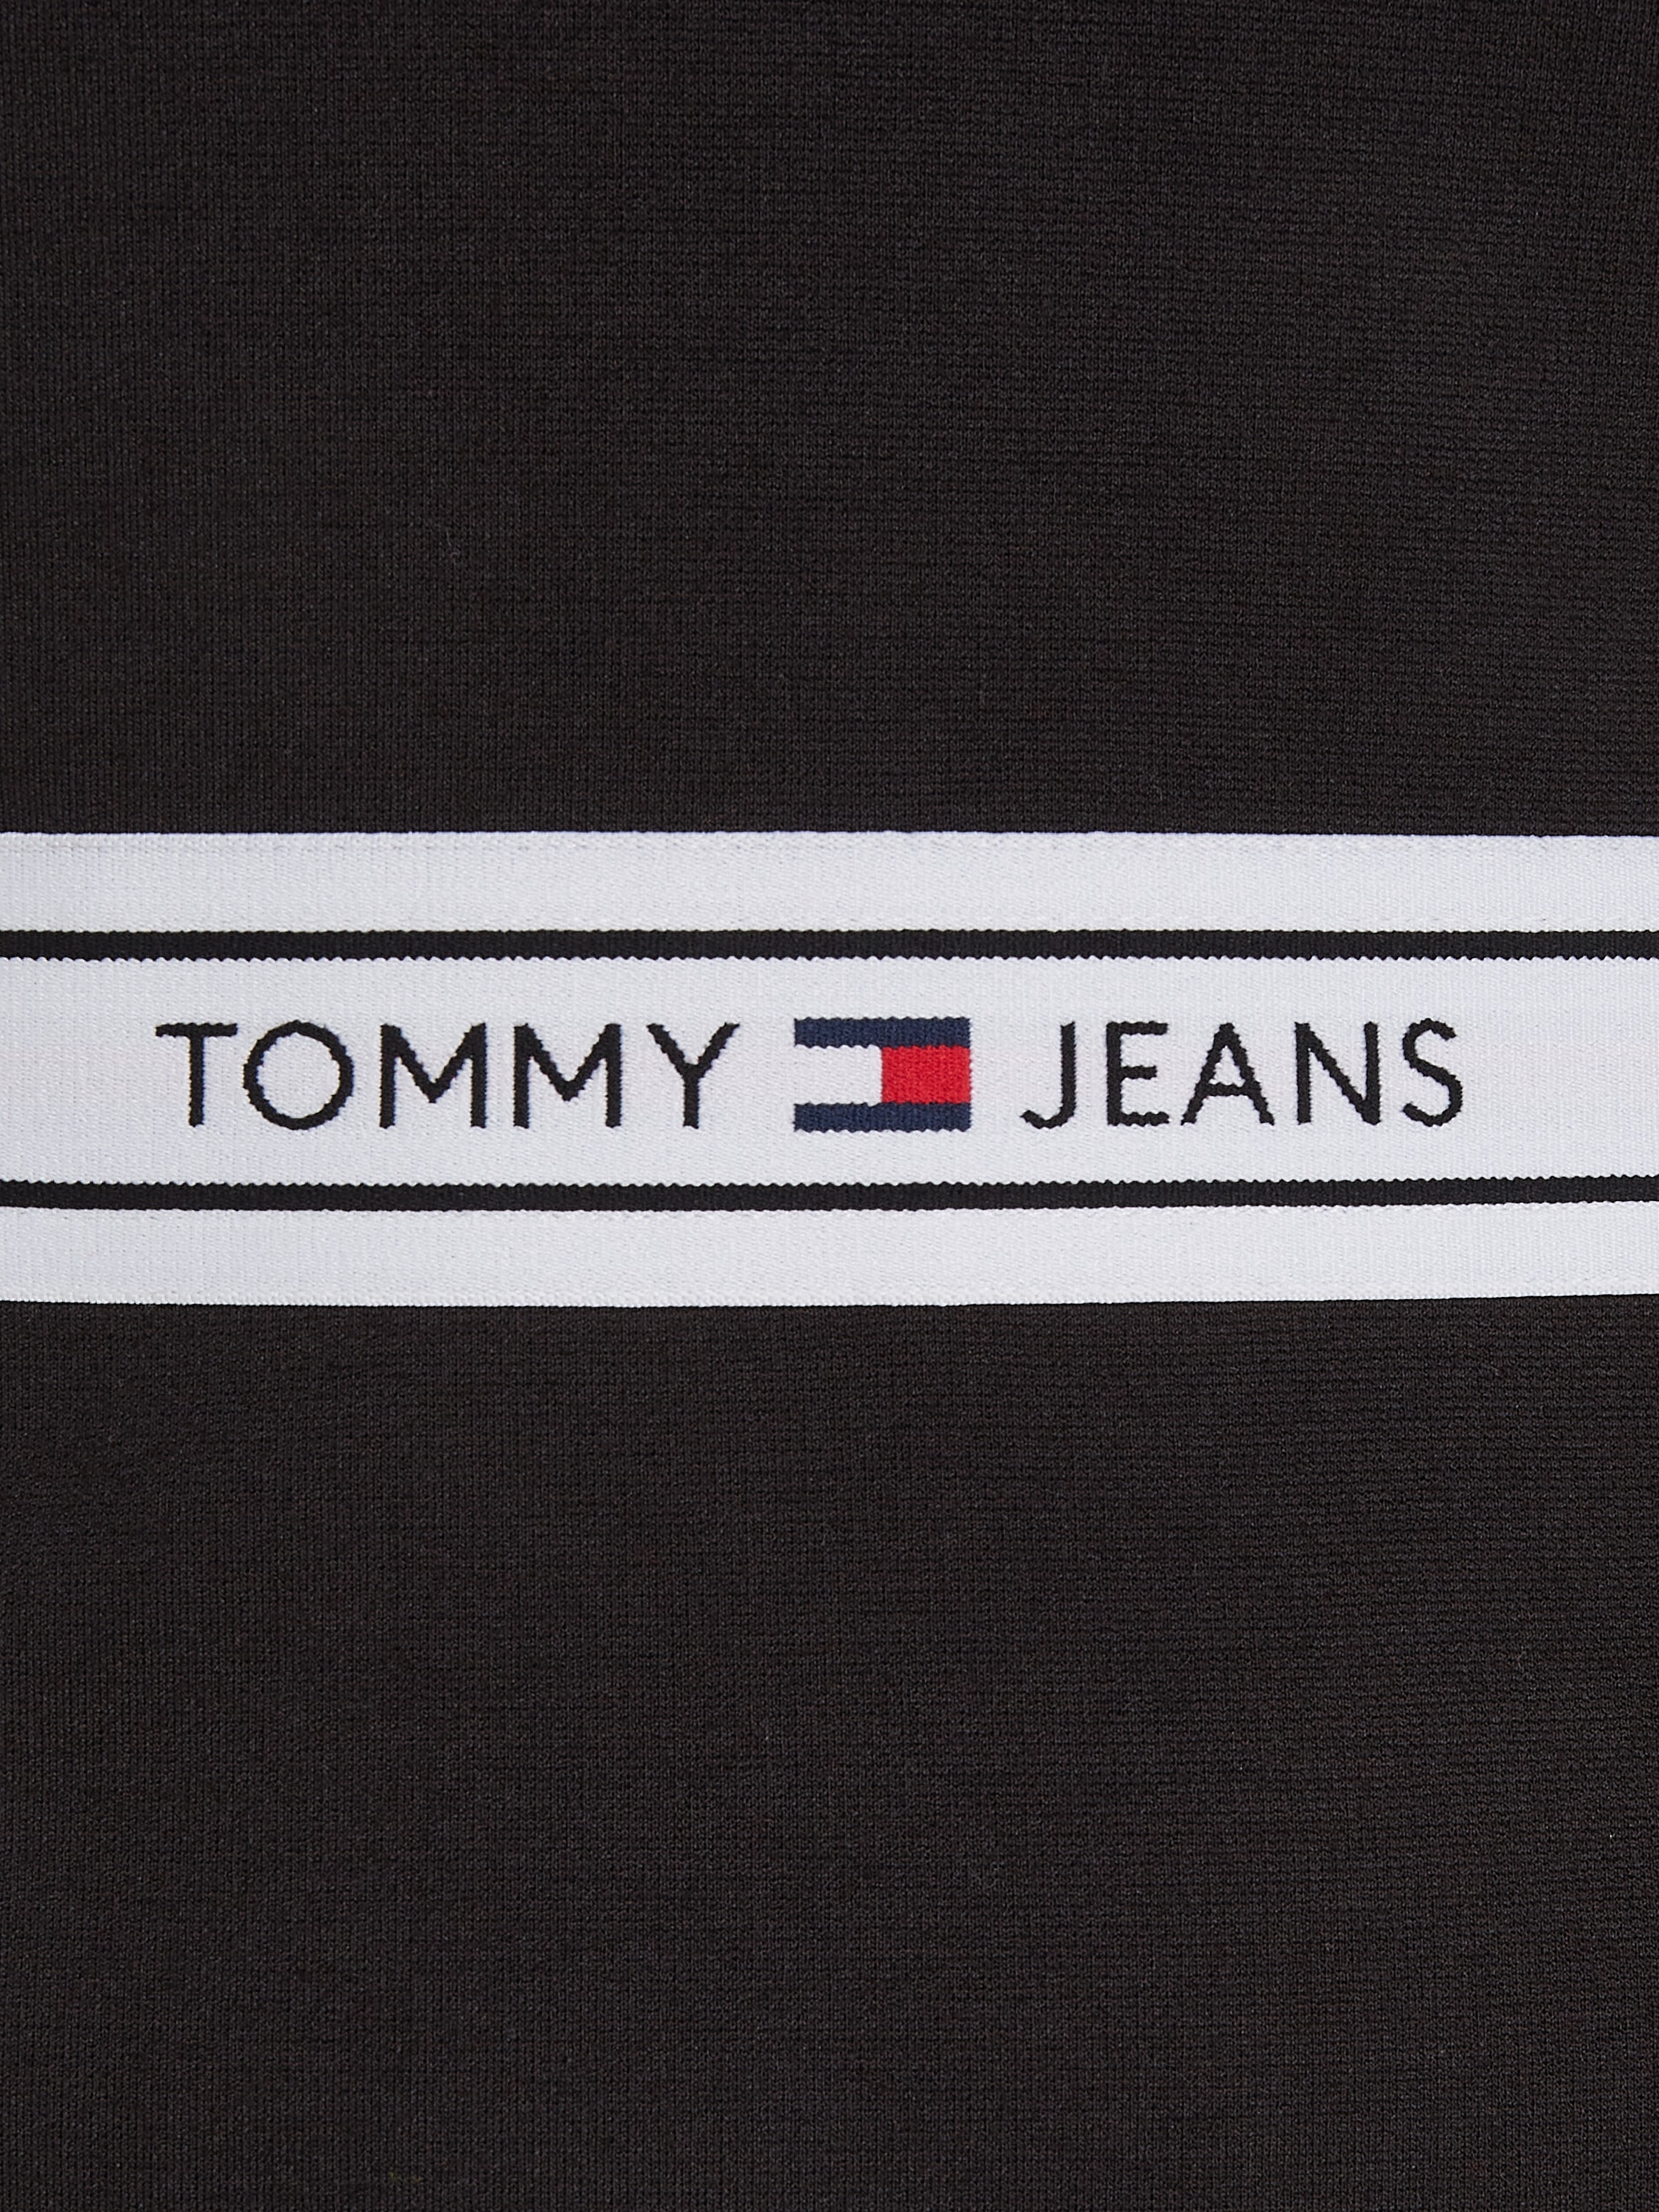 Tommy Jeans Blusenkleid »TJW LOGO TAPE FIT & FLARE EXT«, mit Tommy Jeans Flagge